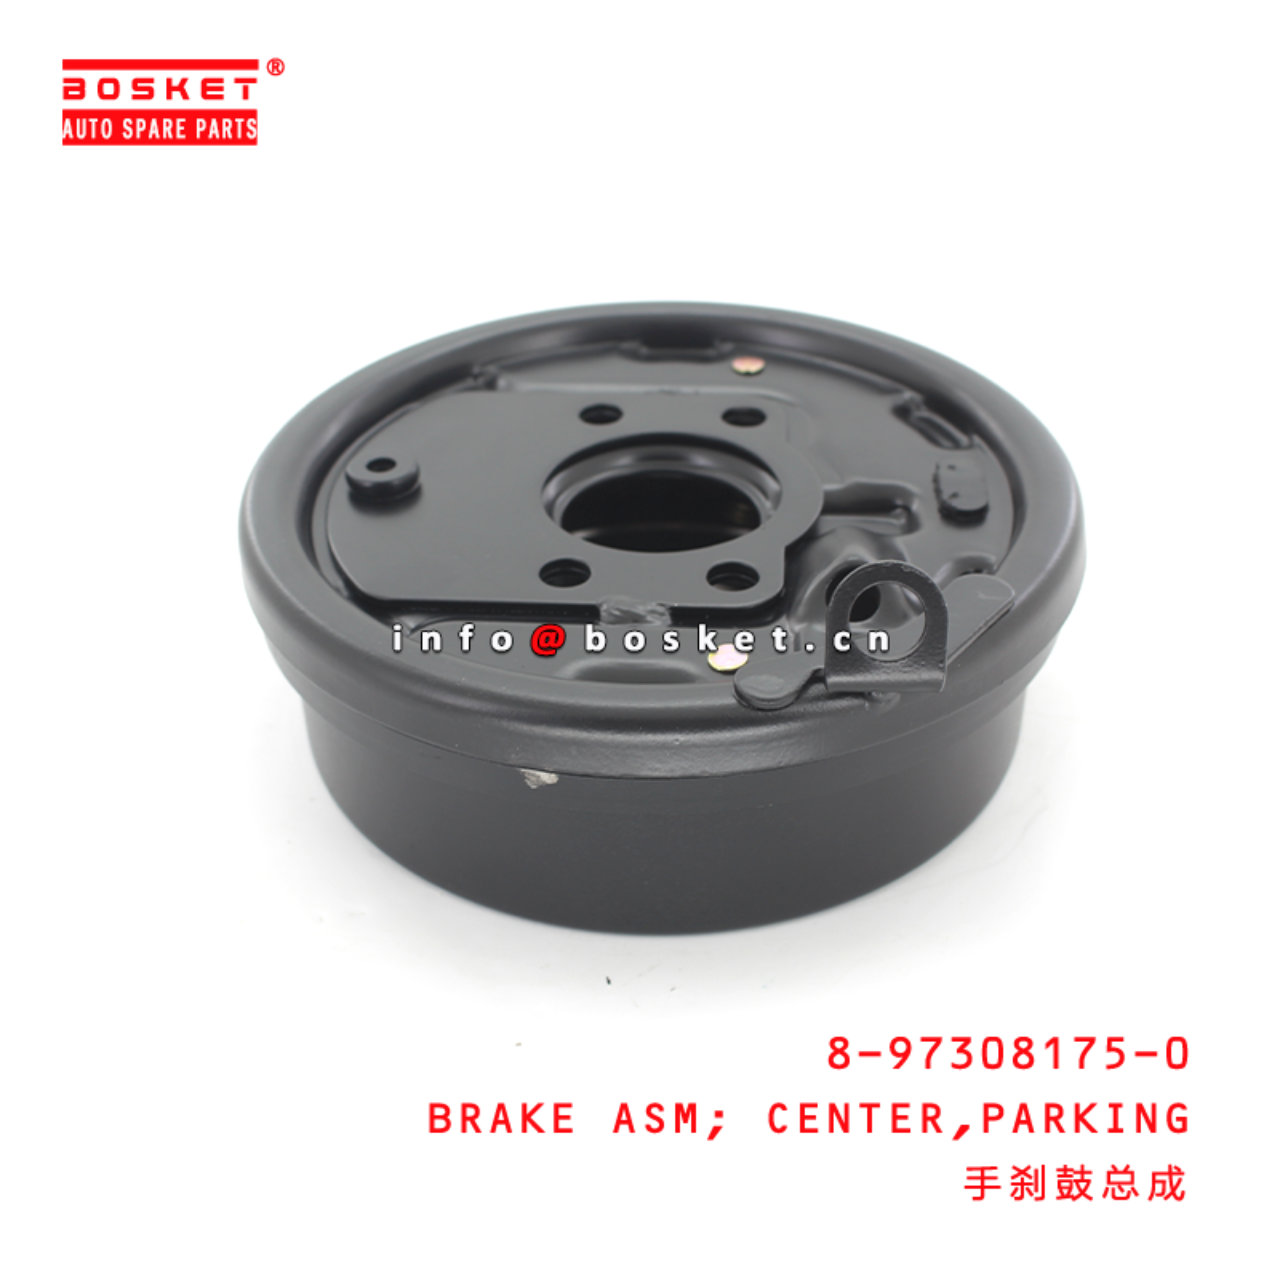 8-97308175-0 Parking Center Brake Assembly Suitable for ISUZU NQR71 8973081750